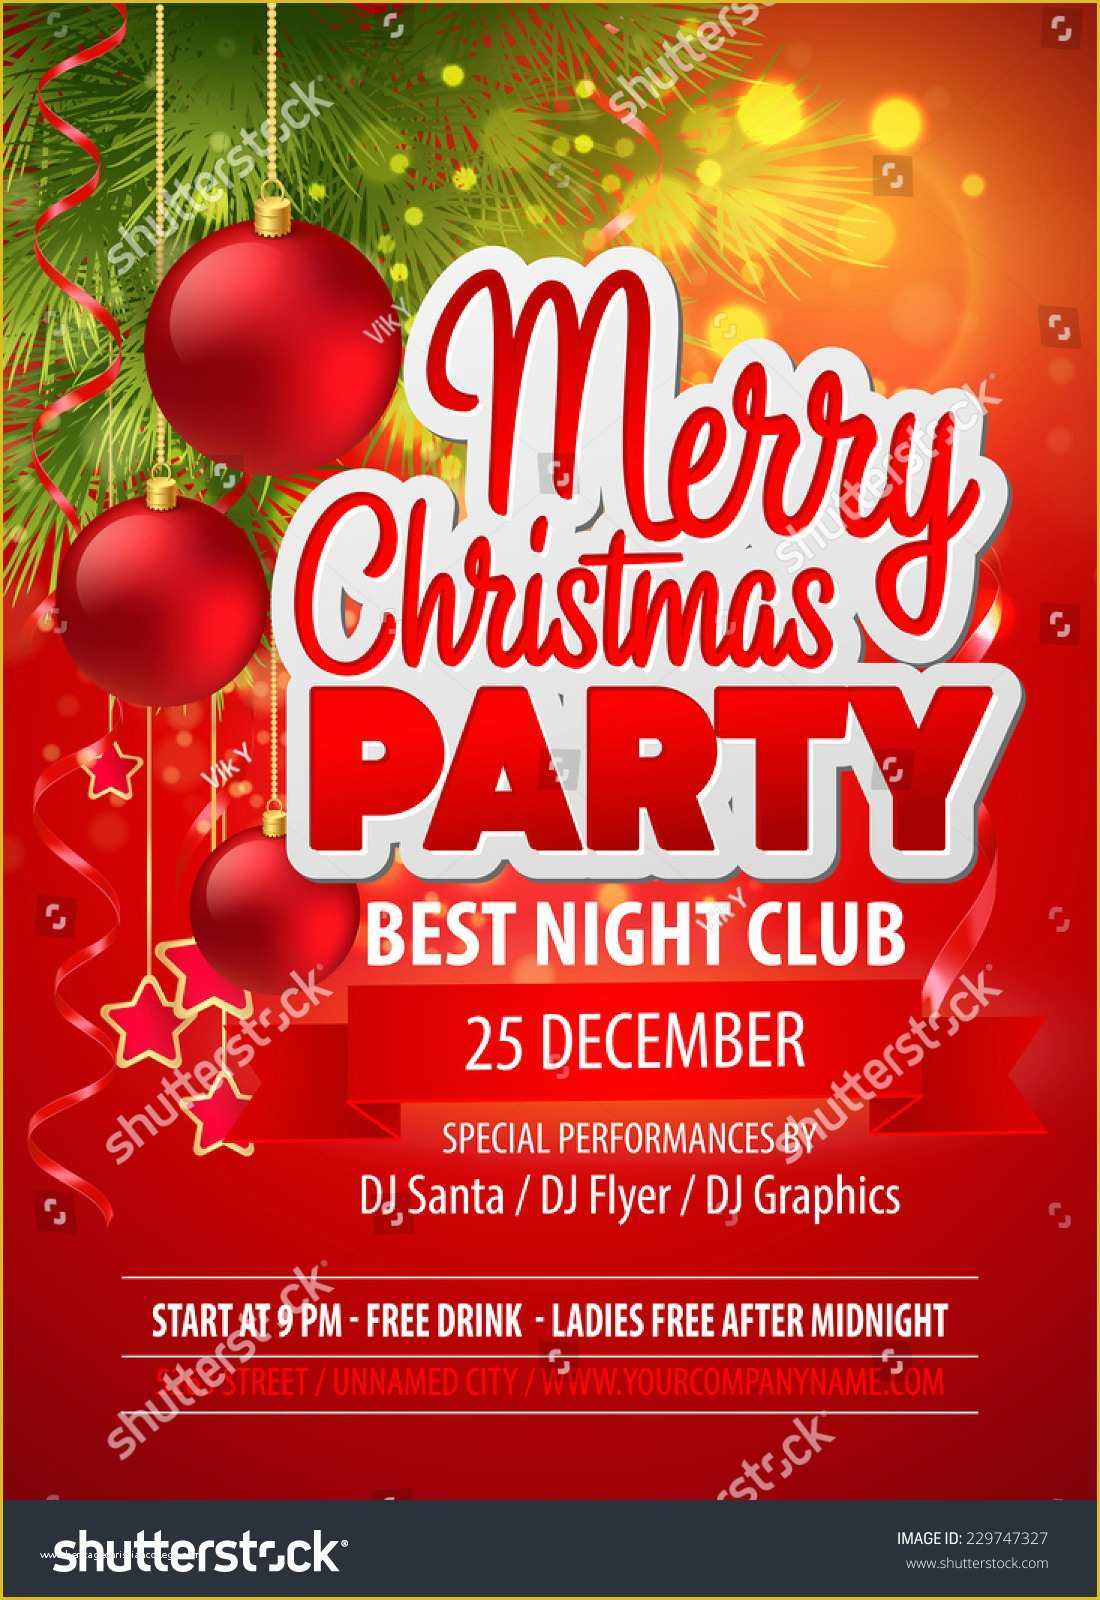 Holiday Party Flyer Template Free Of Christmas Party Flyer Vector Template Stock Vector